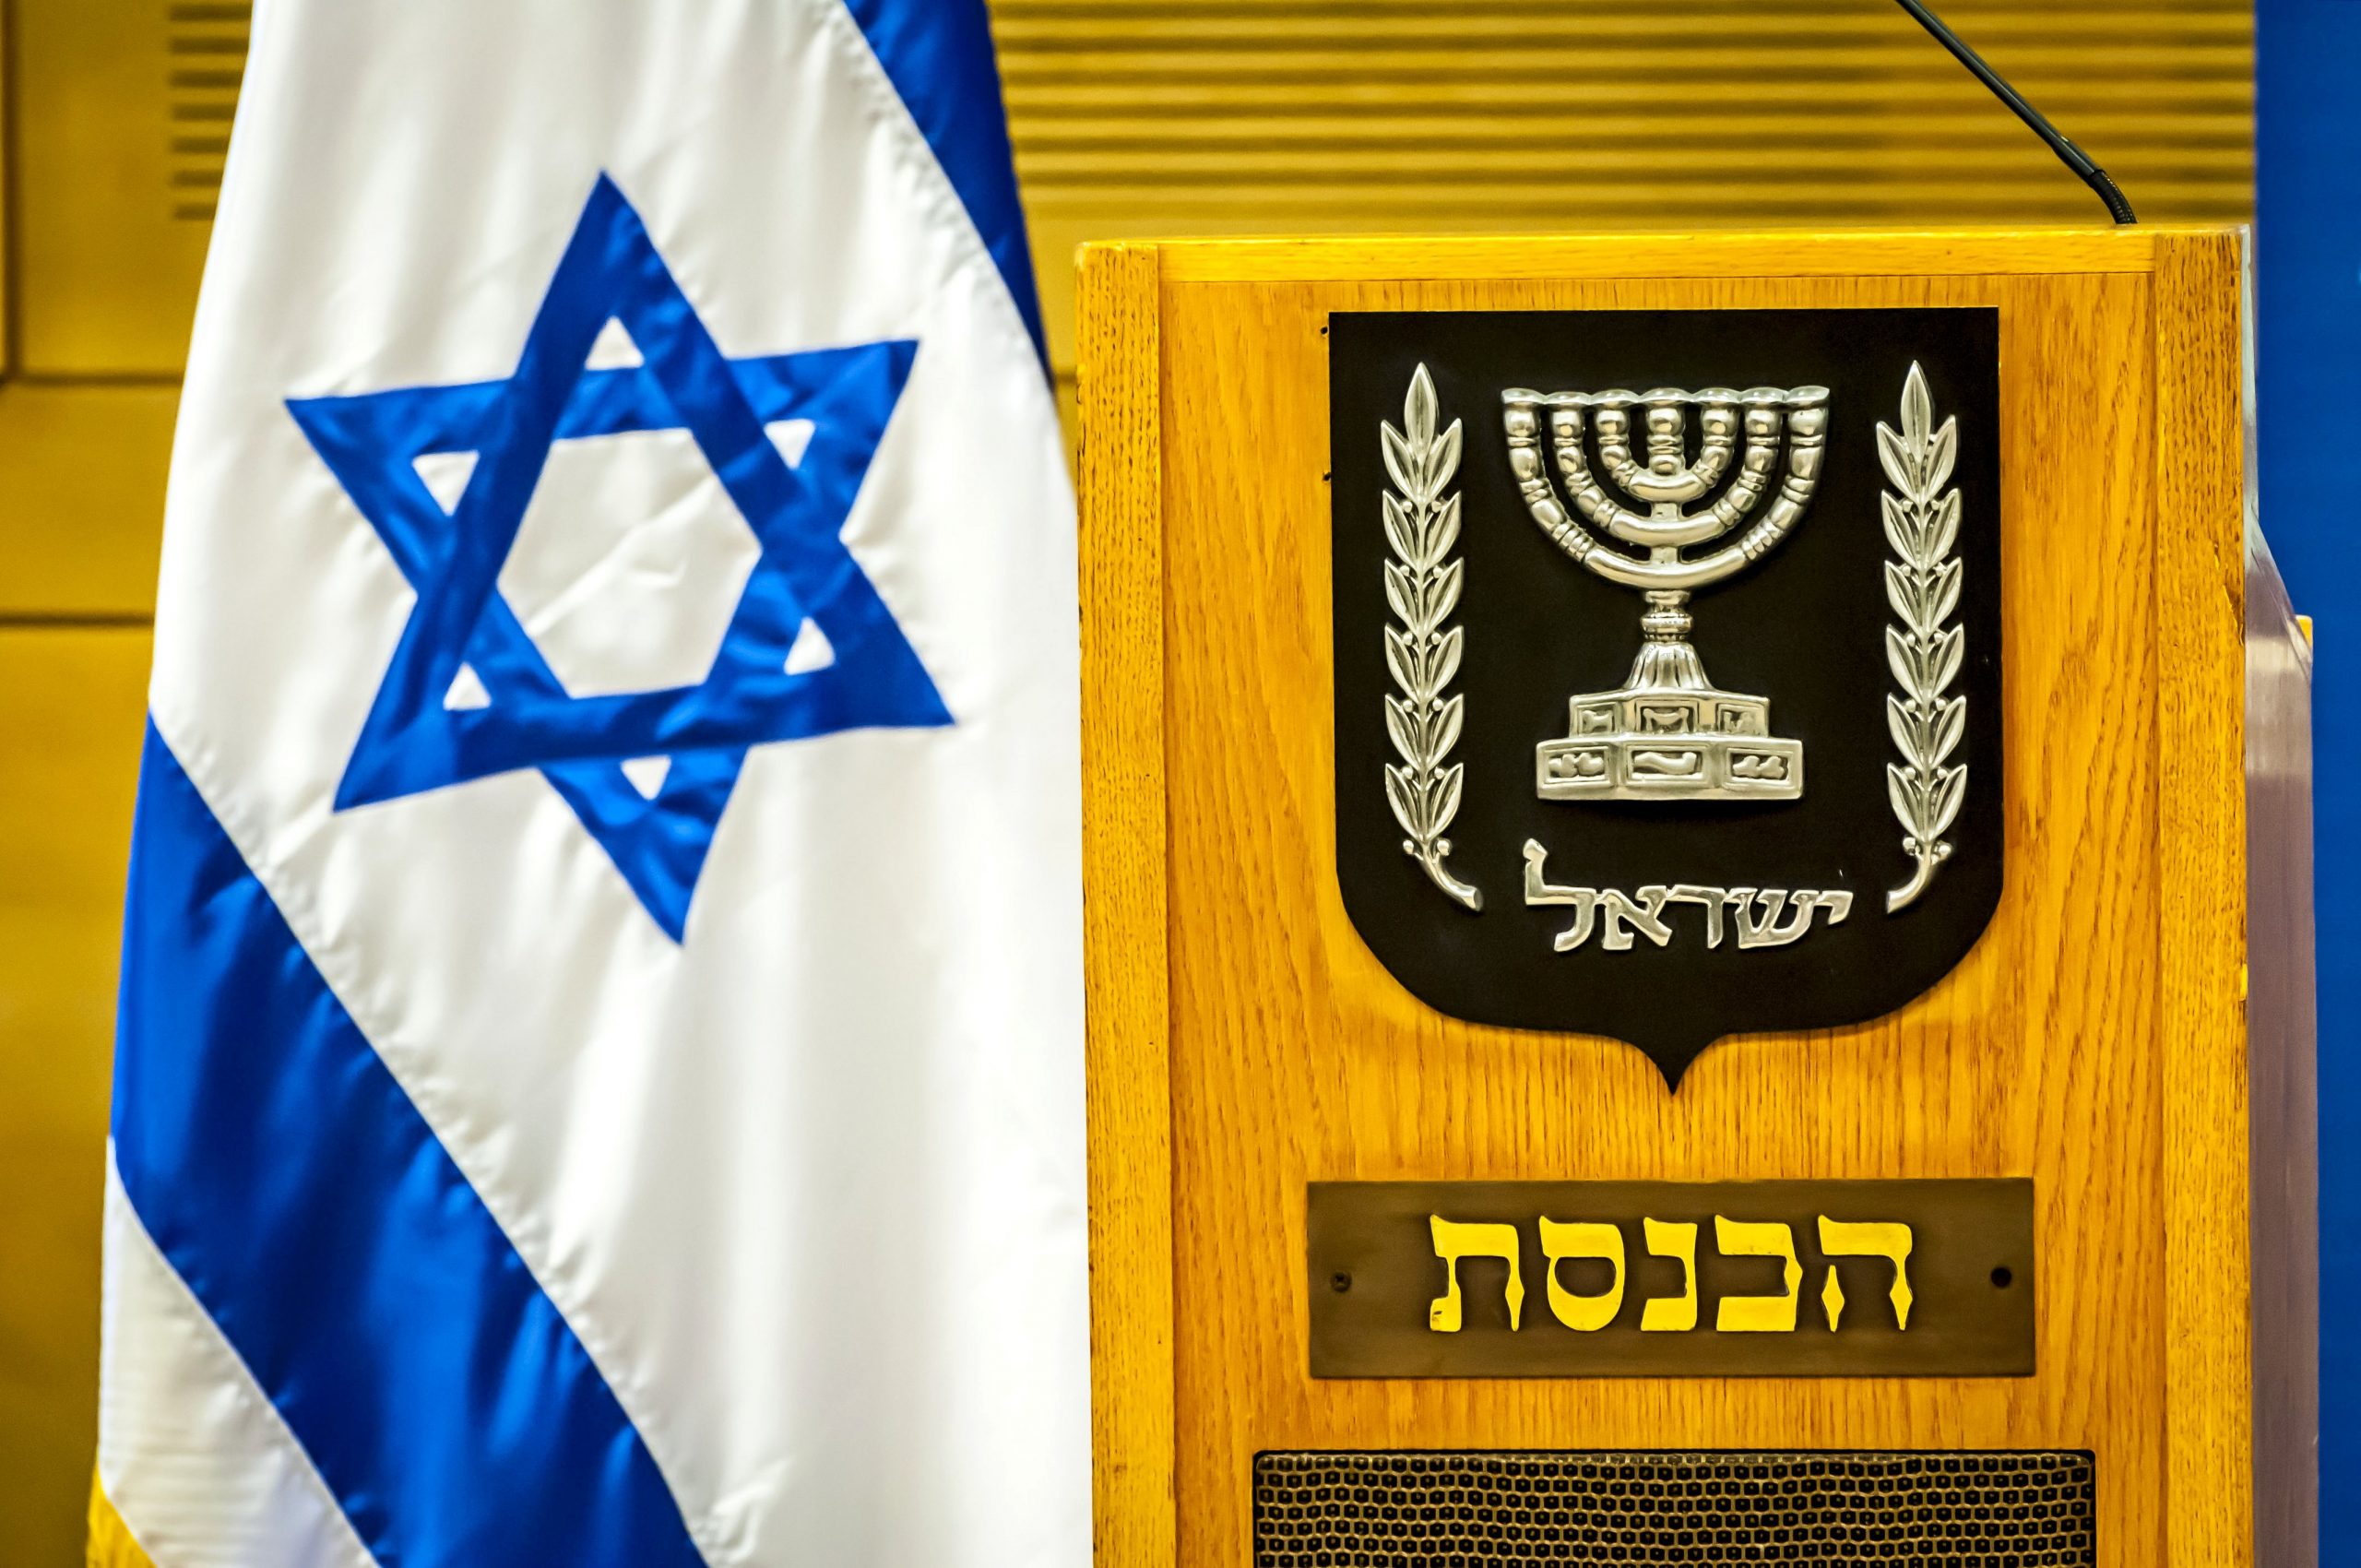 The Menorah as the Symbol for the State of Israel